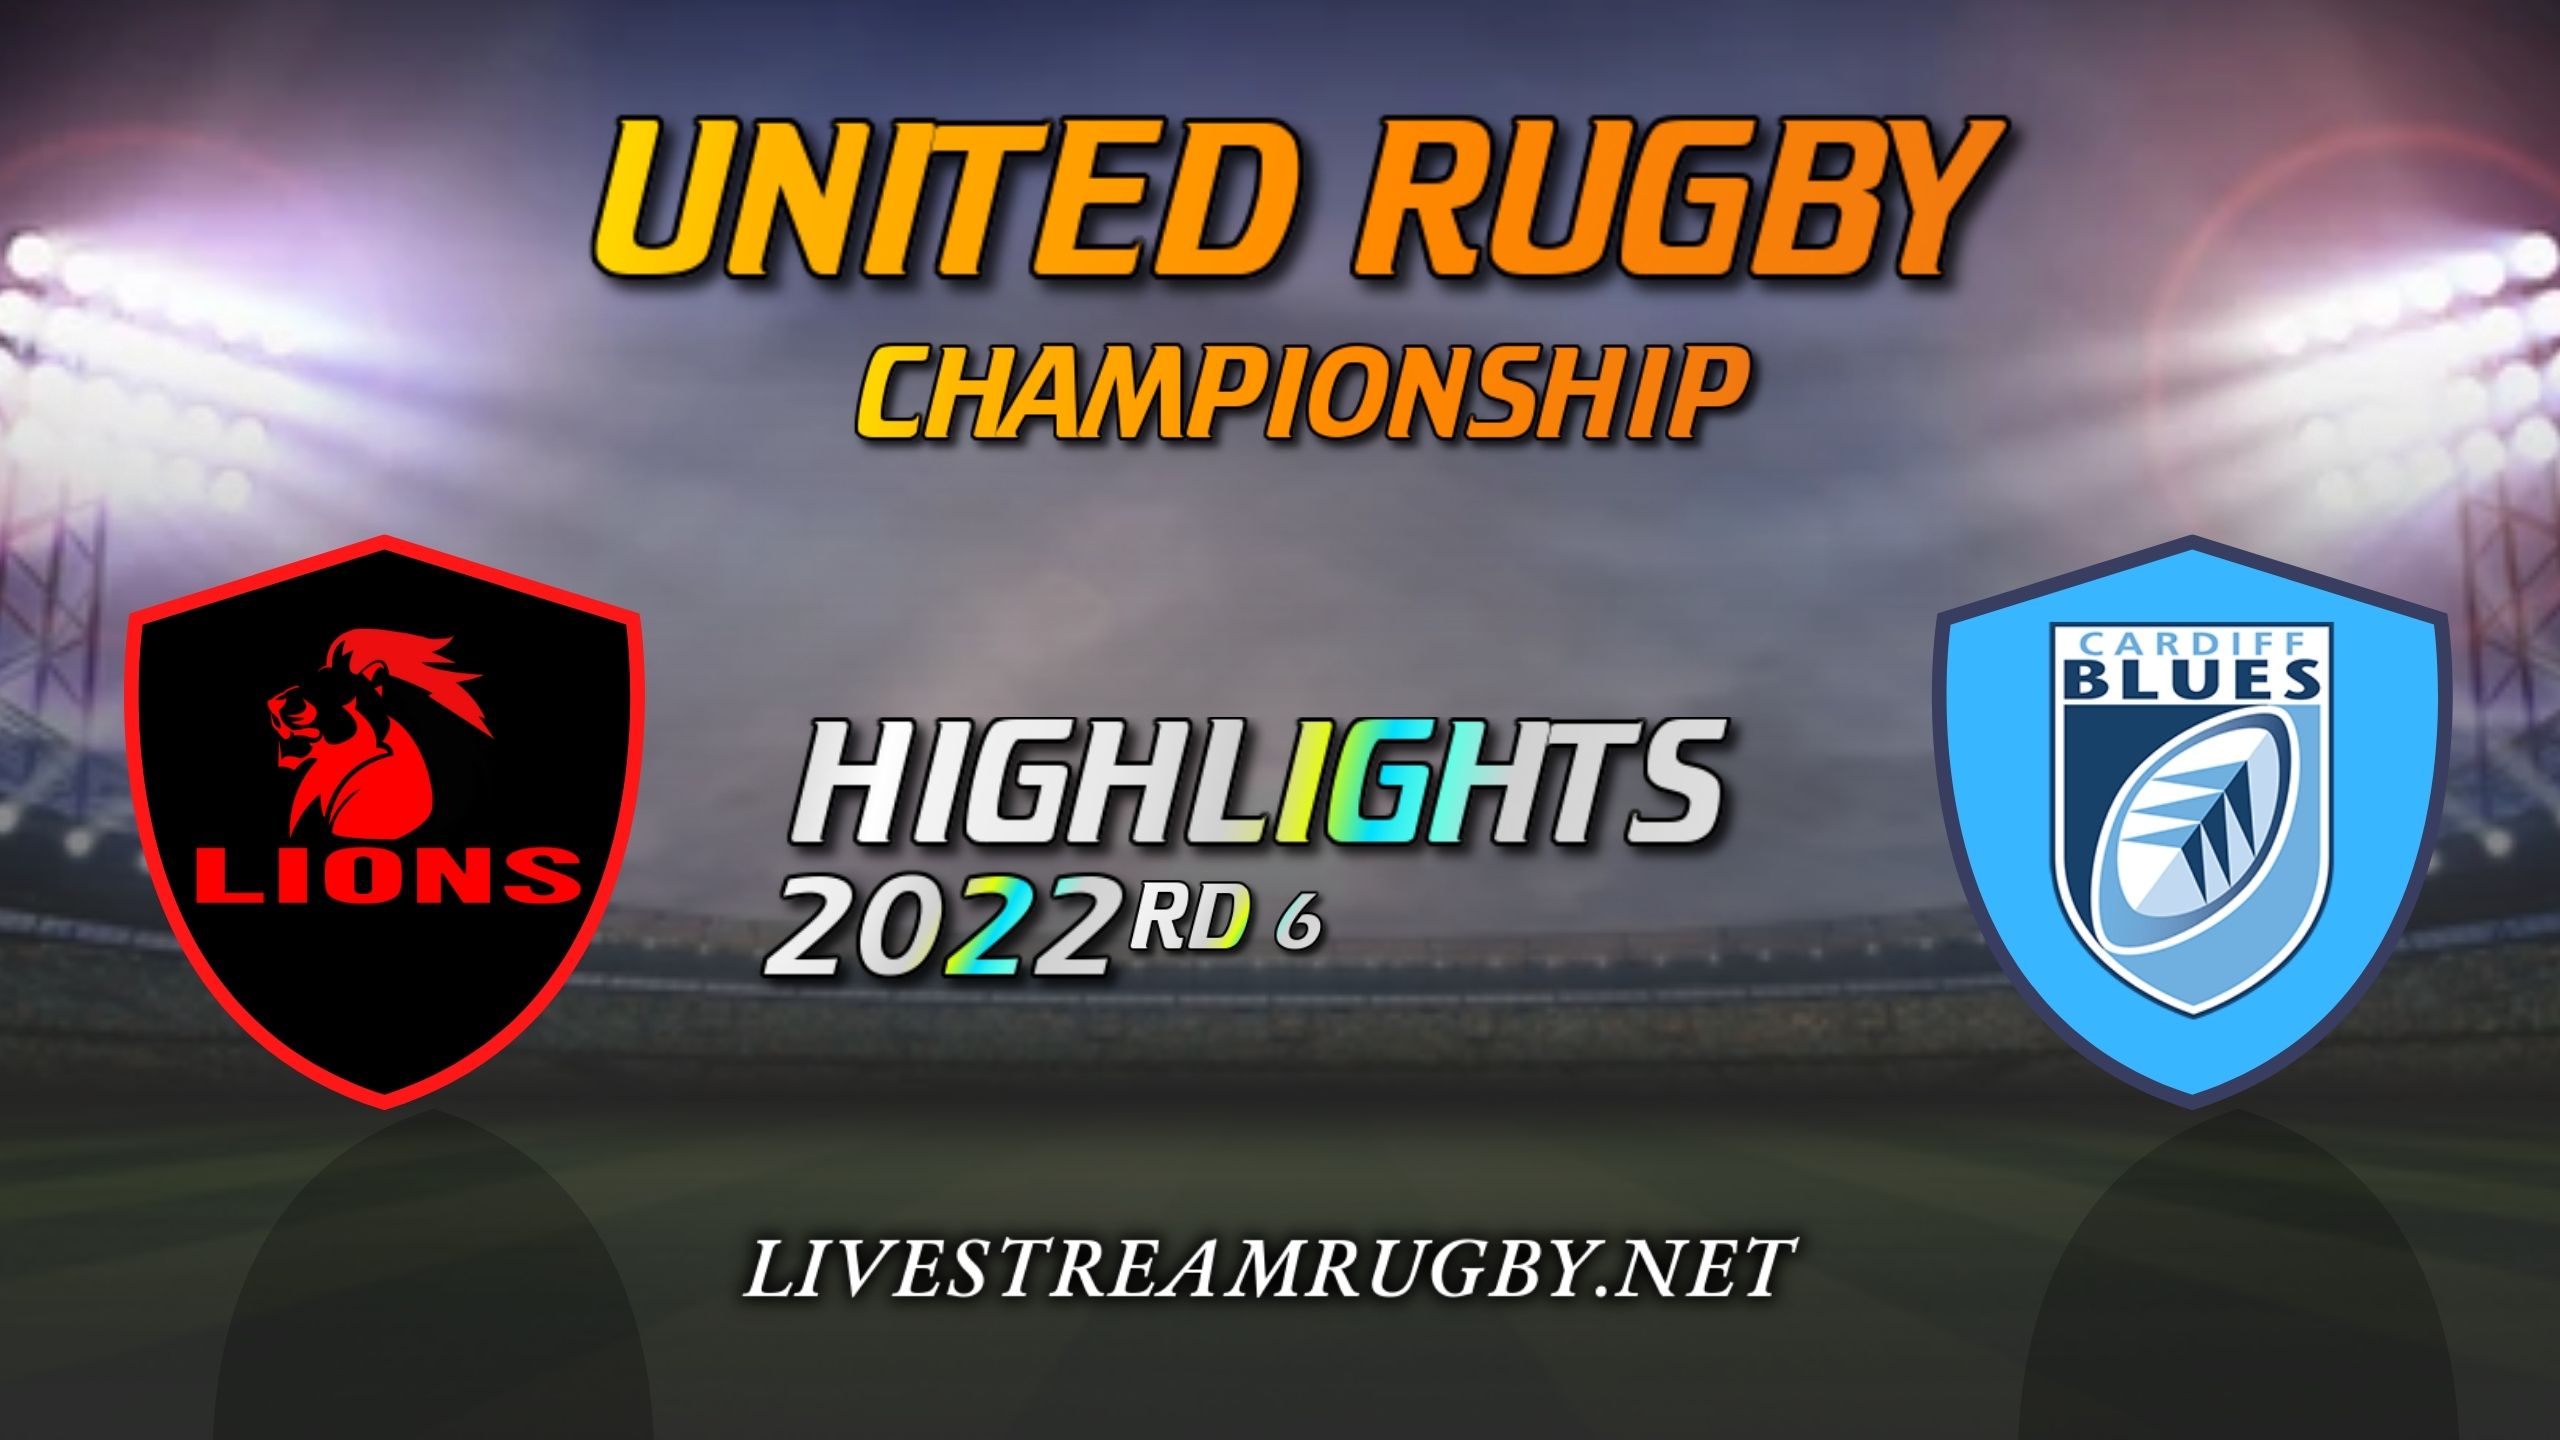 Lions Vs Cardiff Rugby Highlights 2022 Rd 6 United Rugby